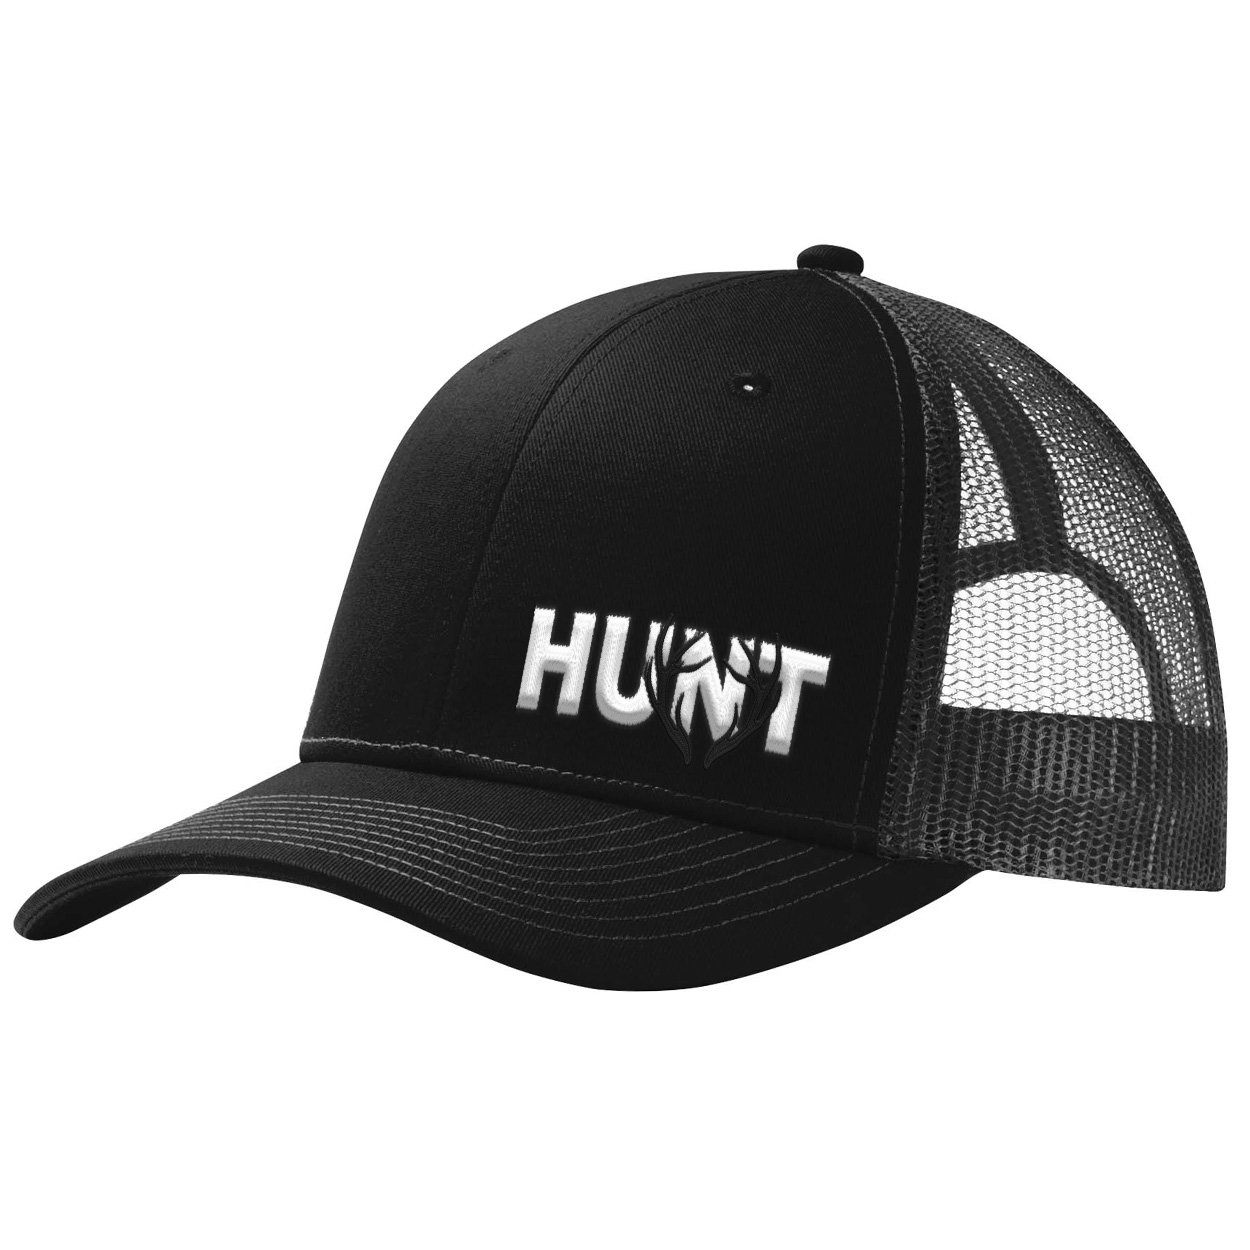 Hunt Rack Logo Night Out Pro Embroidered Snapback Trucker Hat Black/Gray